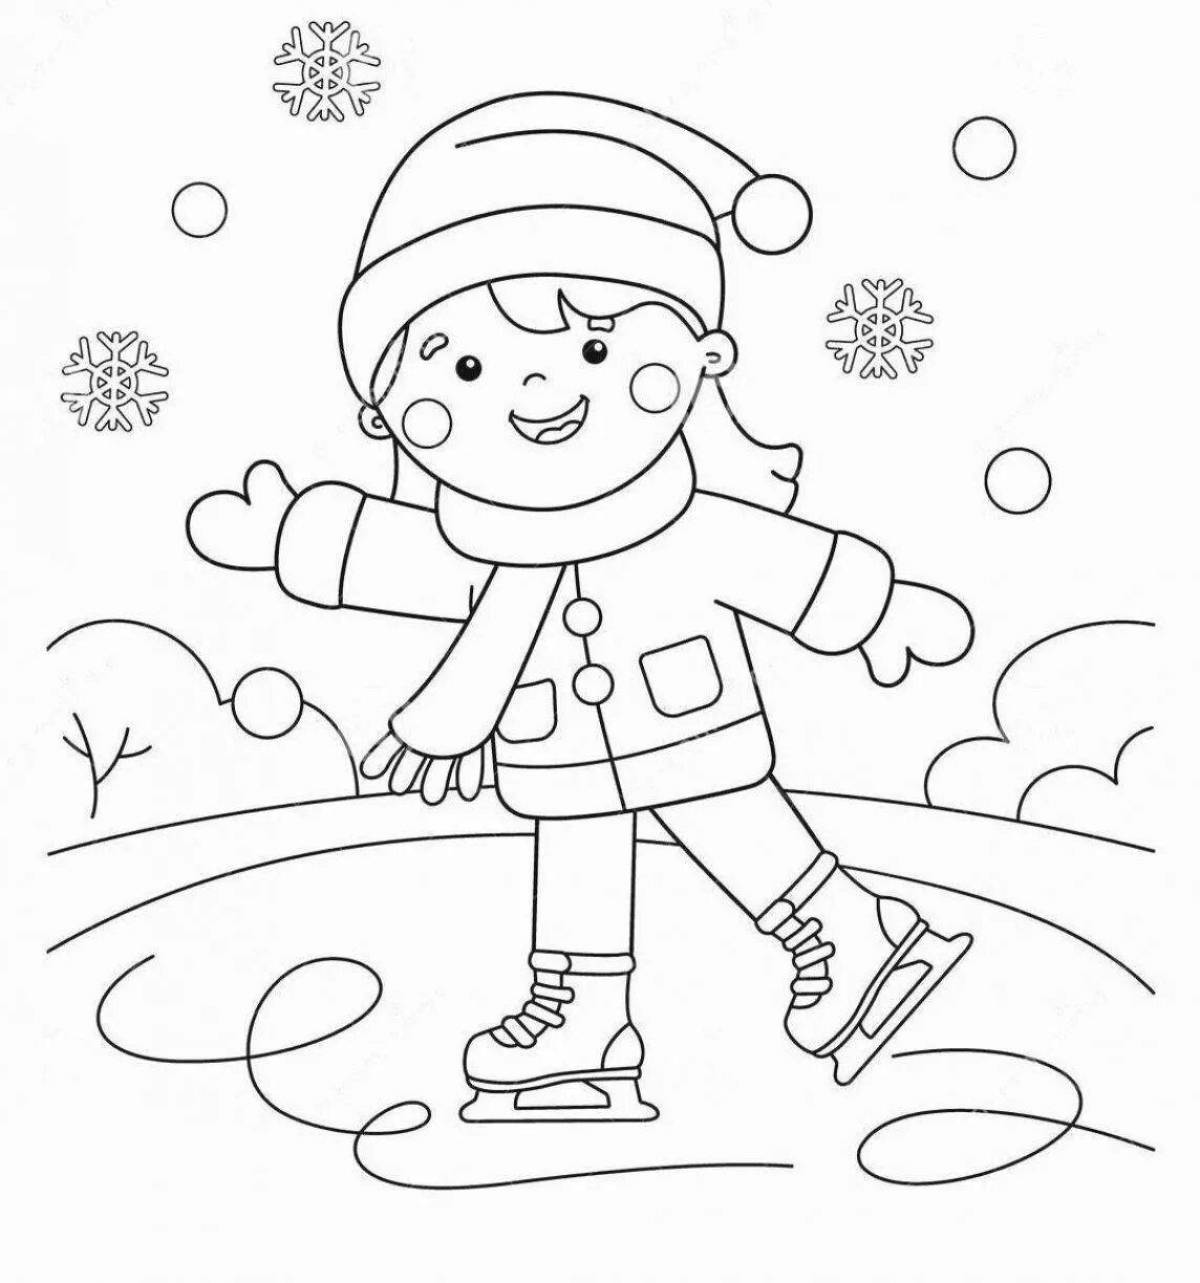 Coloring page glowing tanya is not afraid of frost